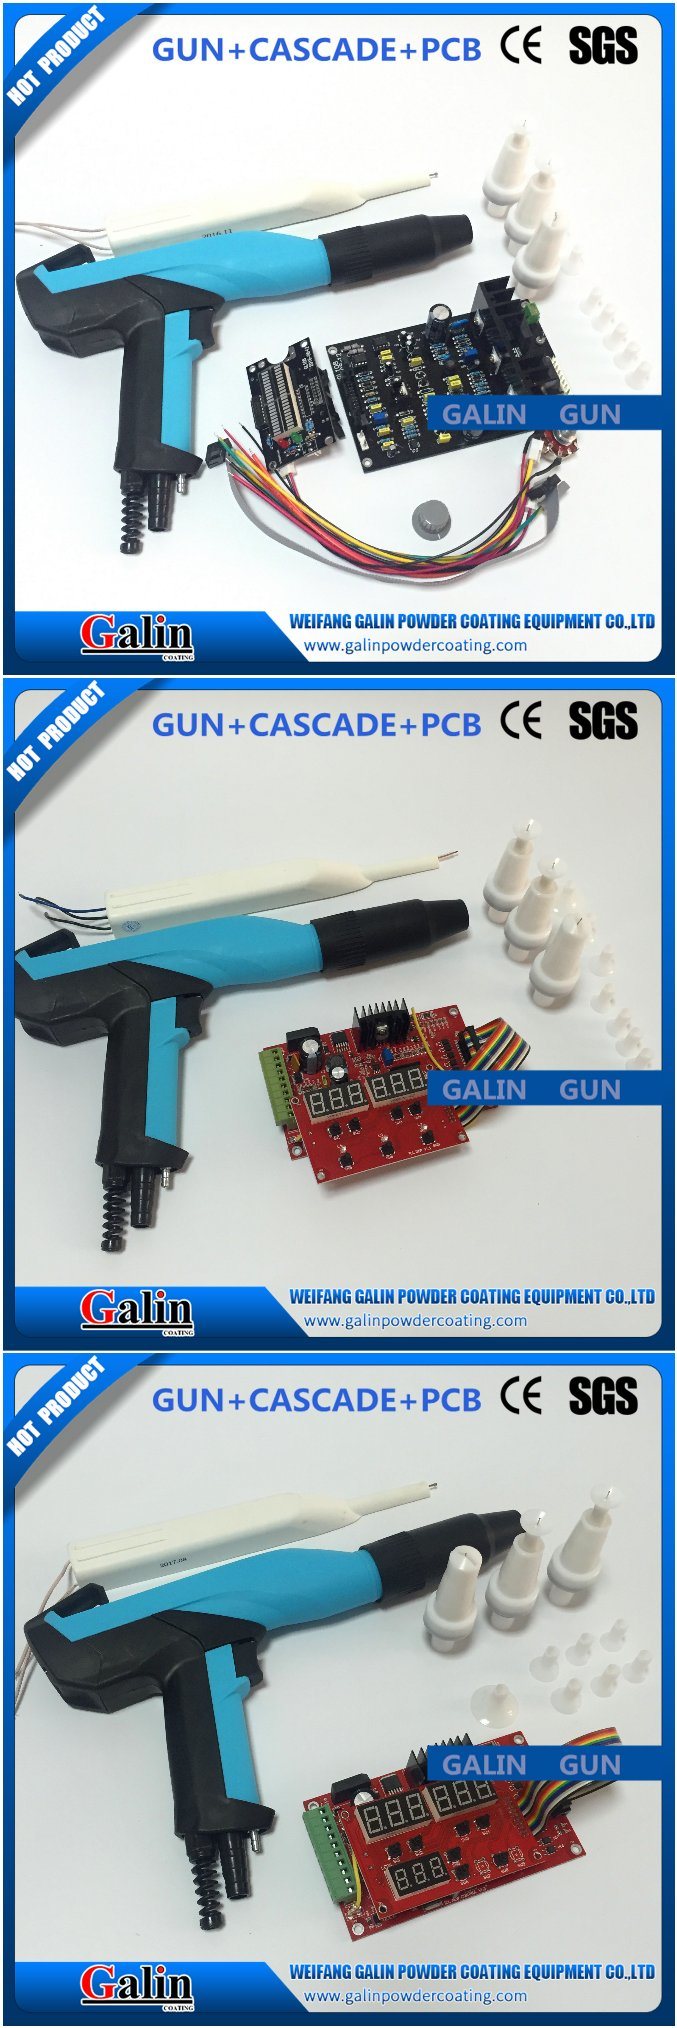 Manual/Automatic Electrostatic Powder Coating/Spray/Paint Gun with PCB and Cascade